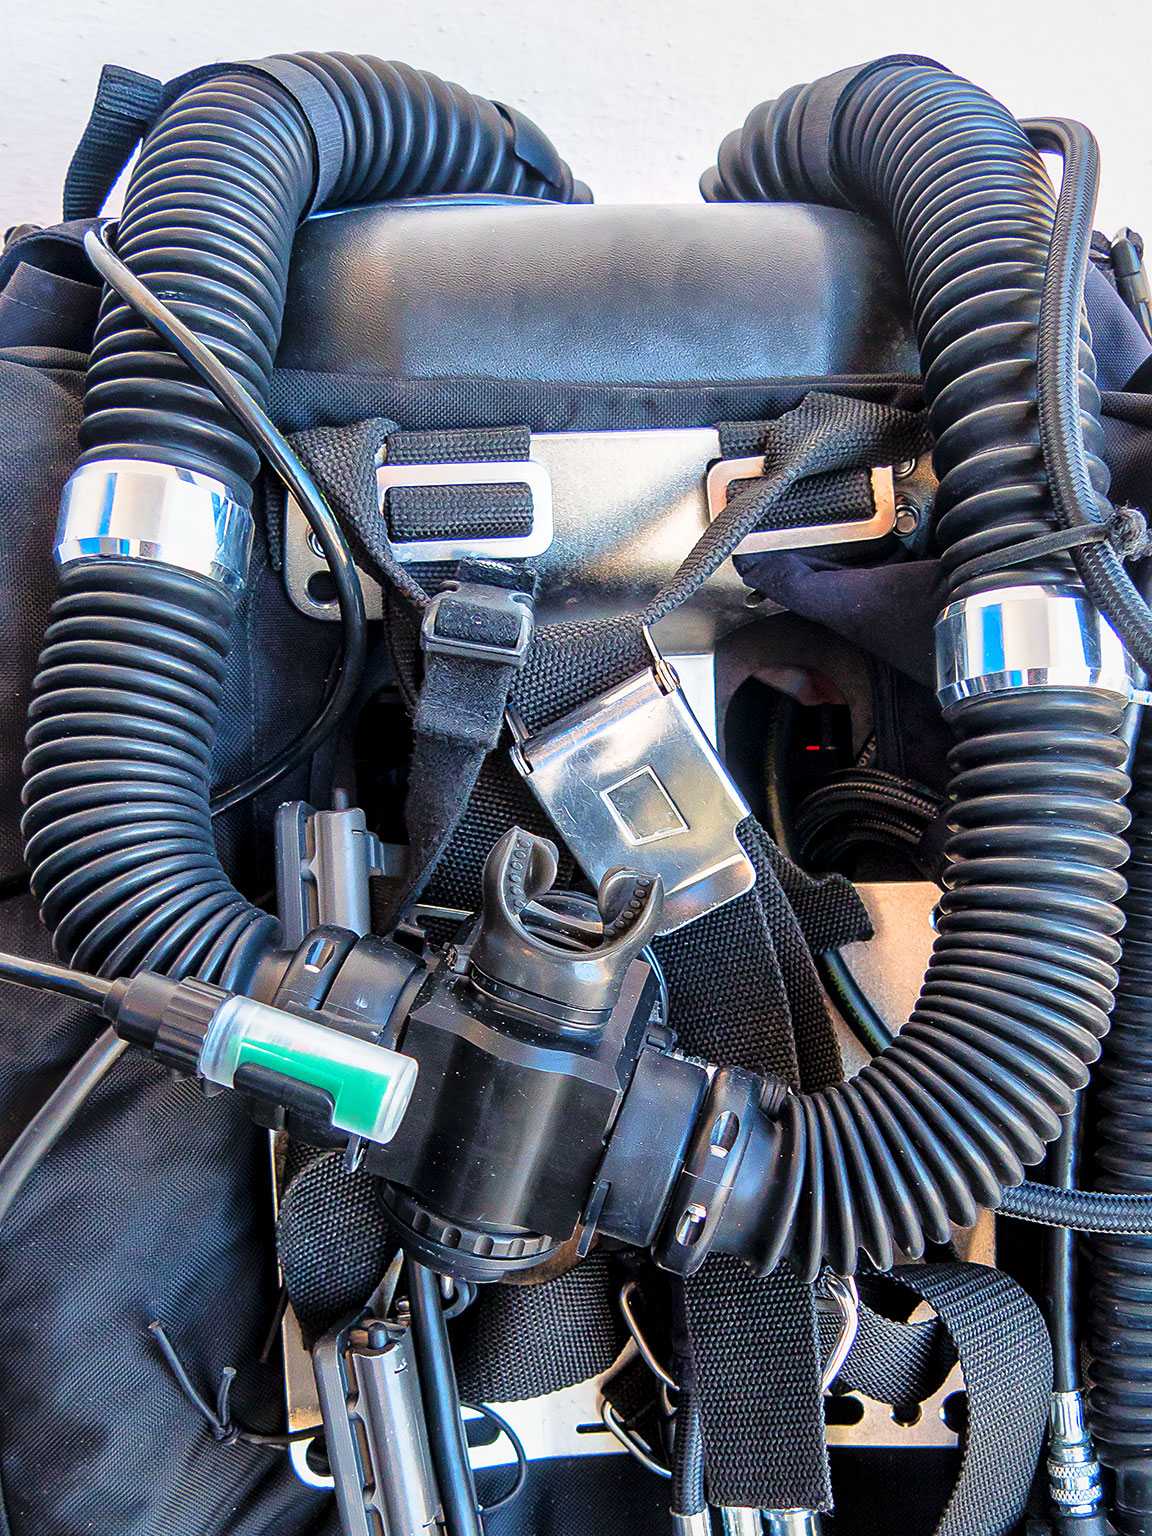 Notice the twin hoses connected to the mouth piece in the middle. Gas breathed comes in from one hose, and is exhaled and 'recycled' through the other.